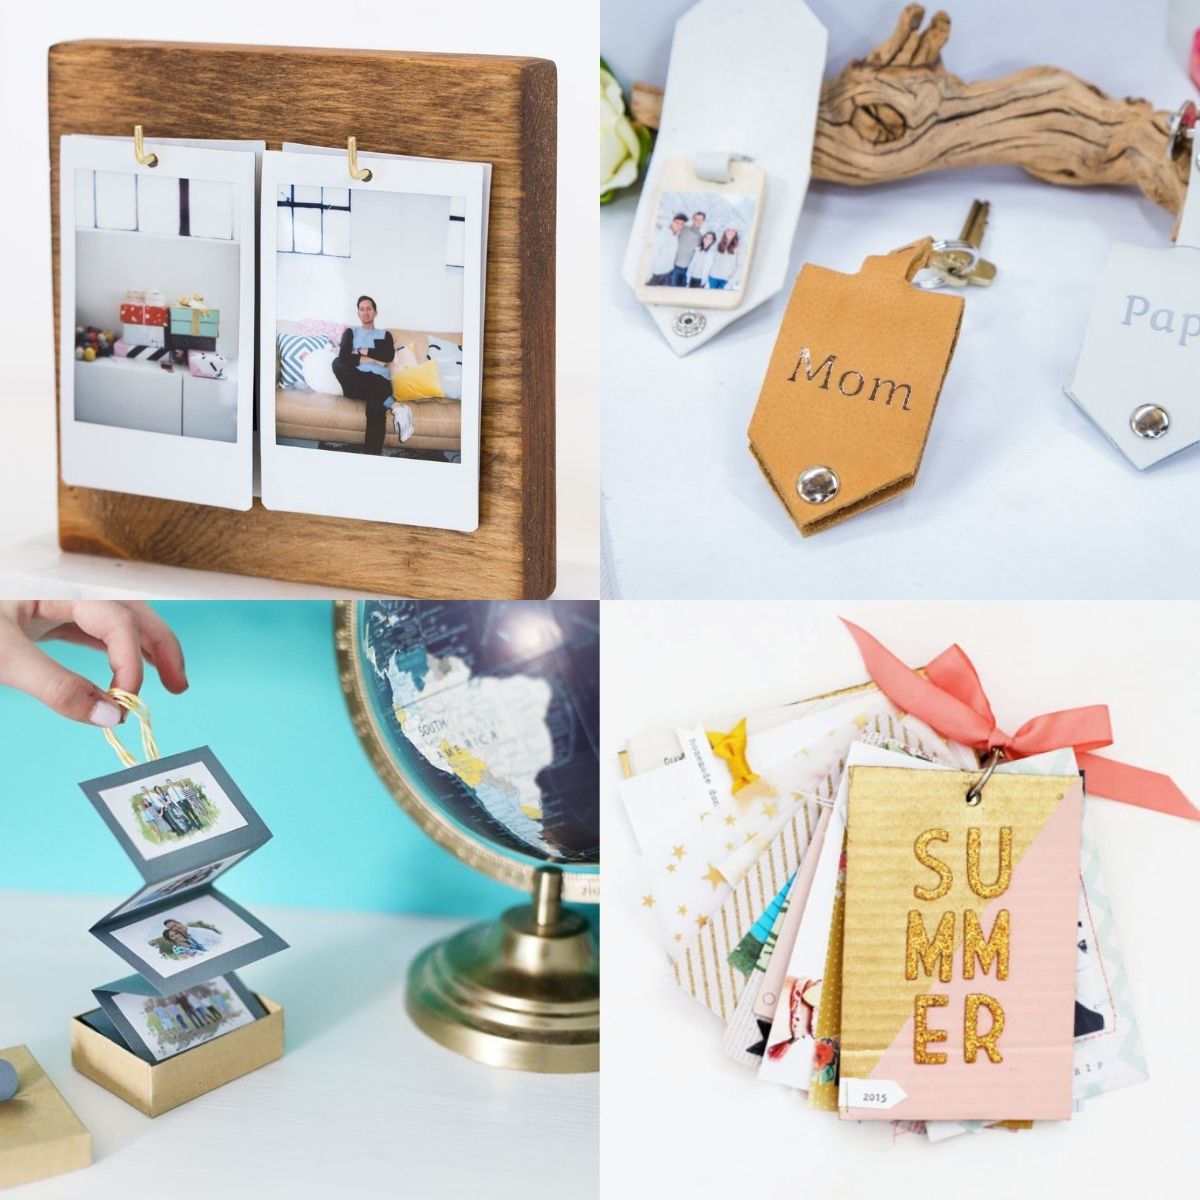 31 DIY Photo Album Ideas That Make for a Perfect Gift - Craftsy Hacks